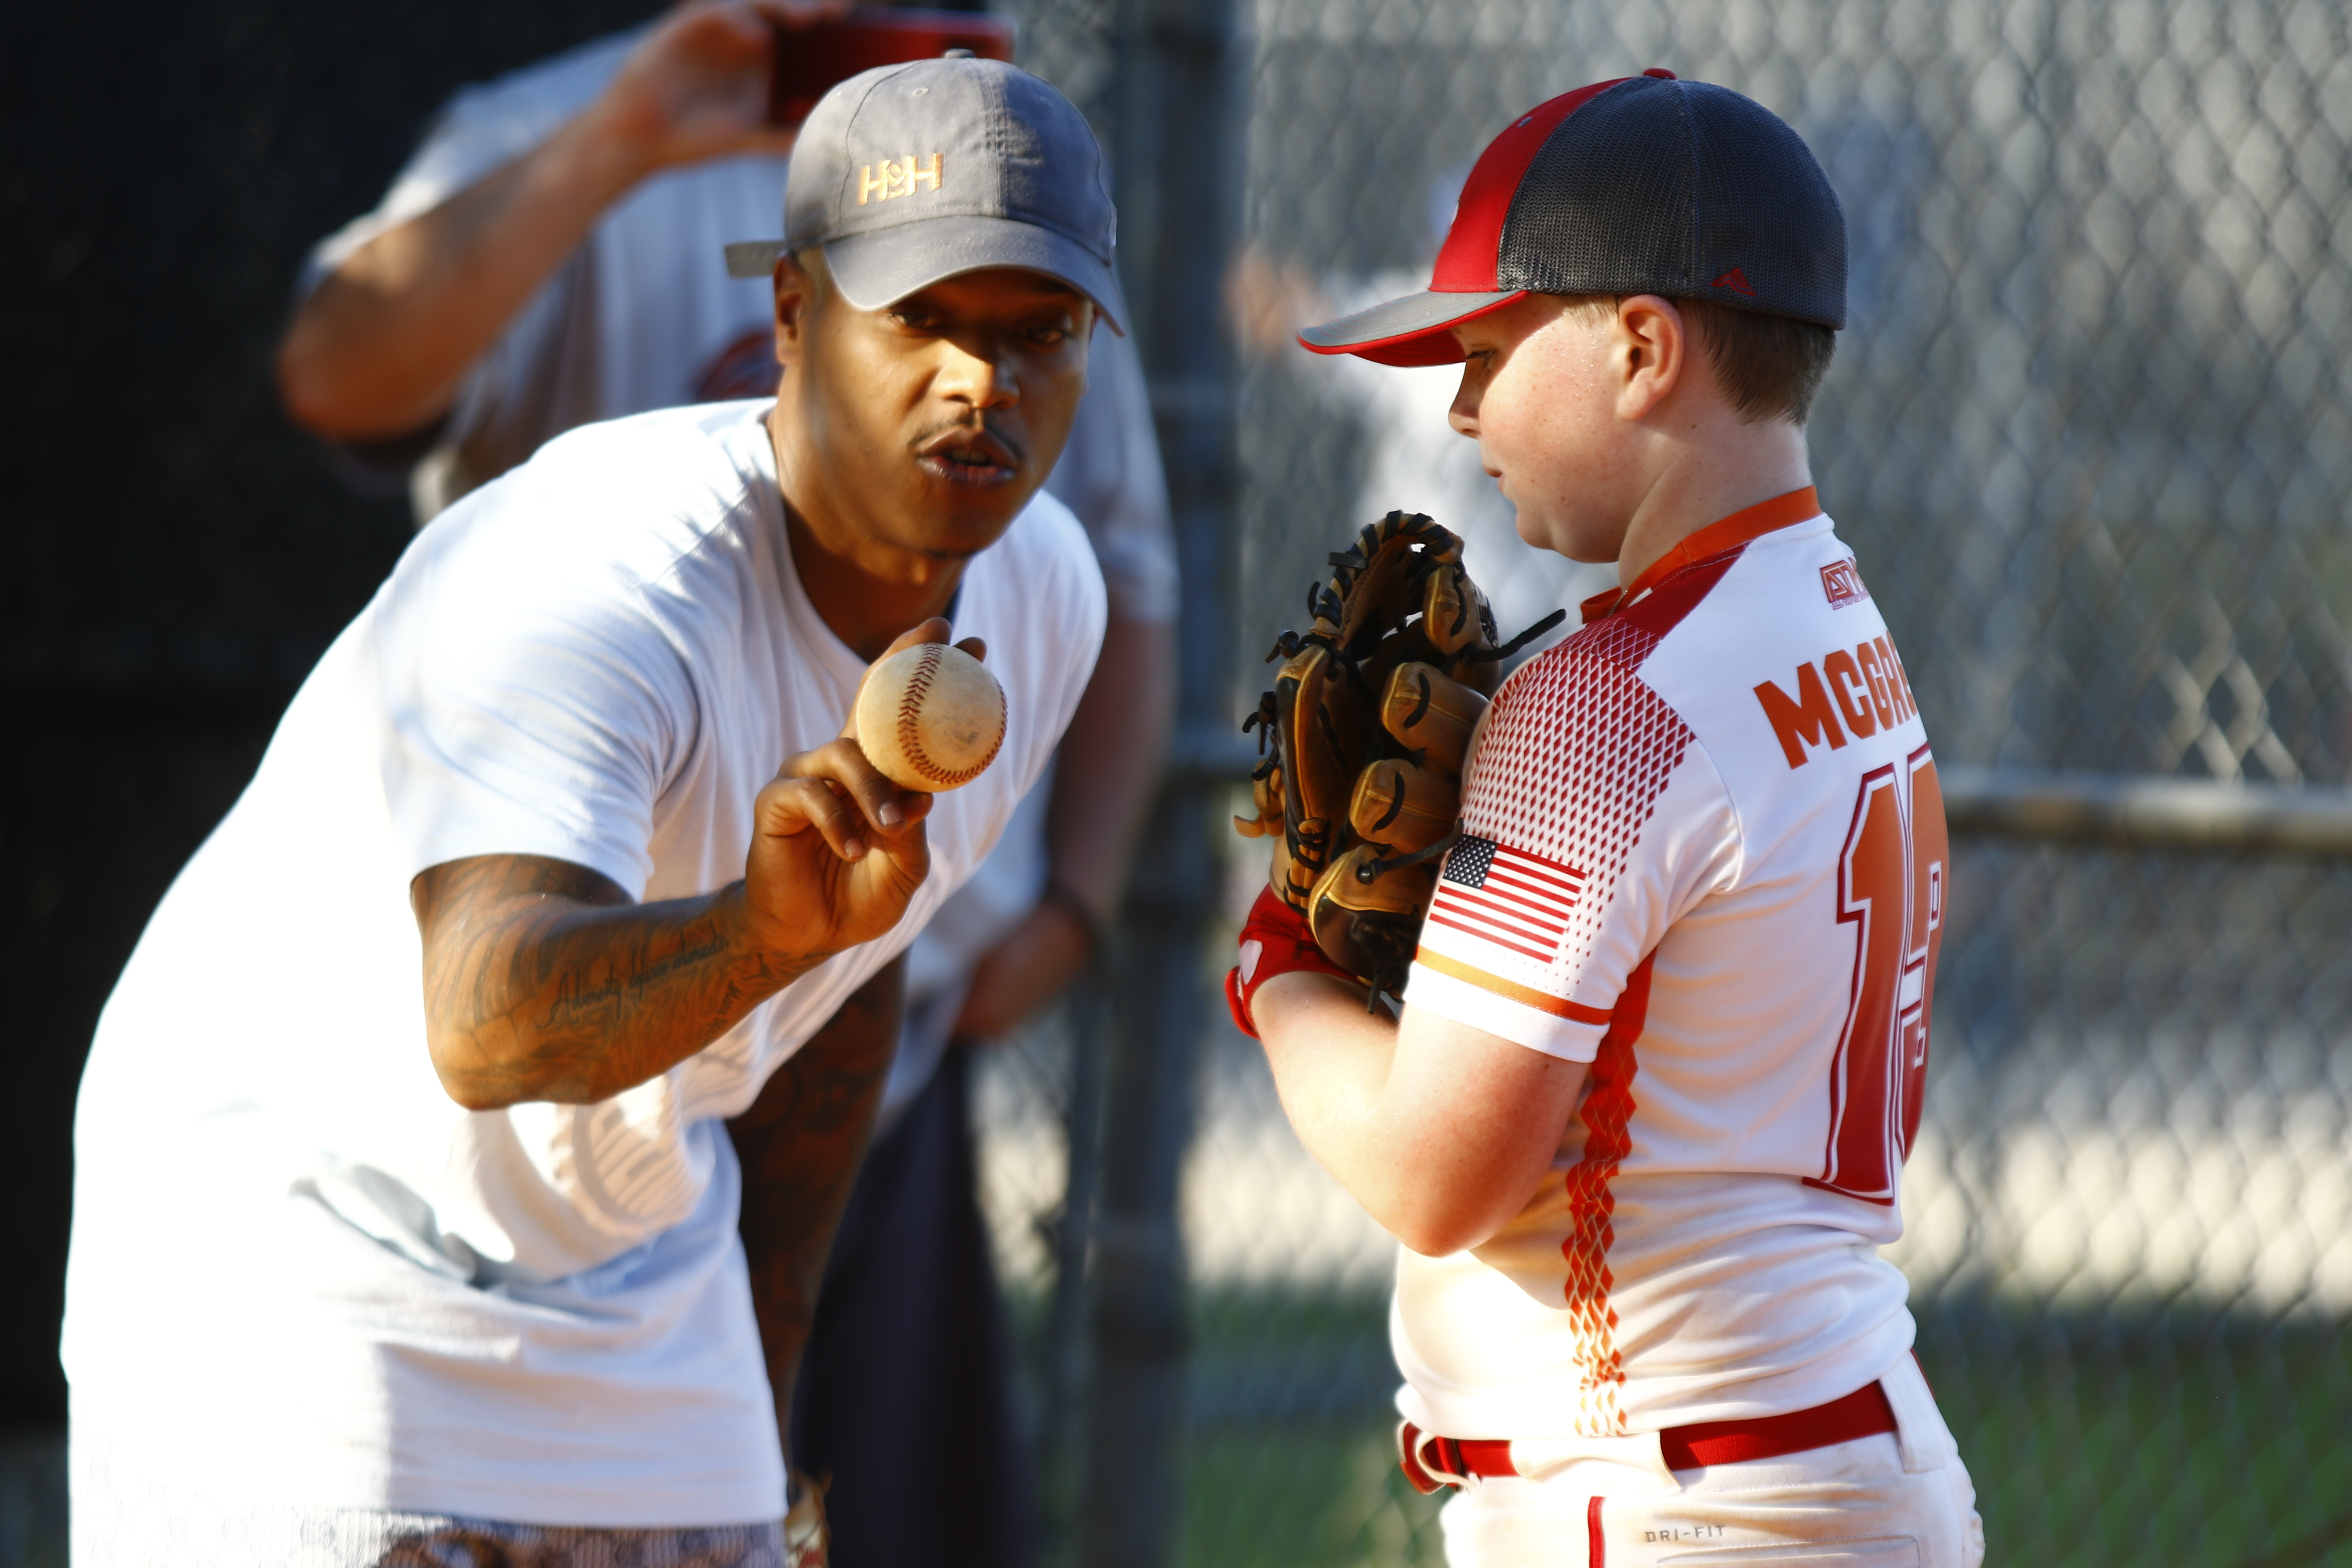 Marcus Stroman offers advice, inspiration at Tampa youth baseball practice